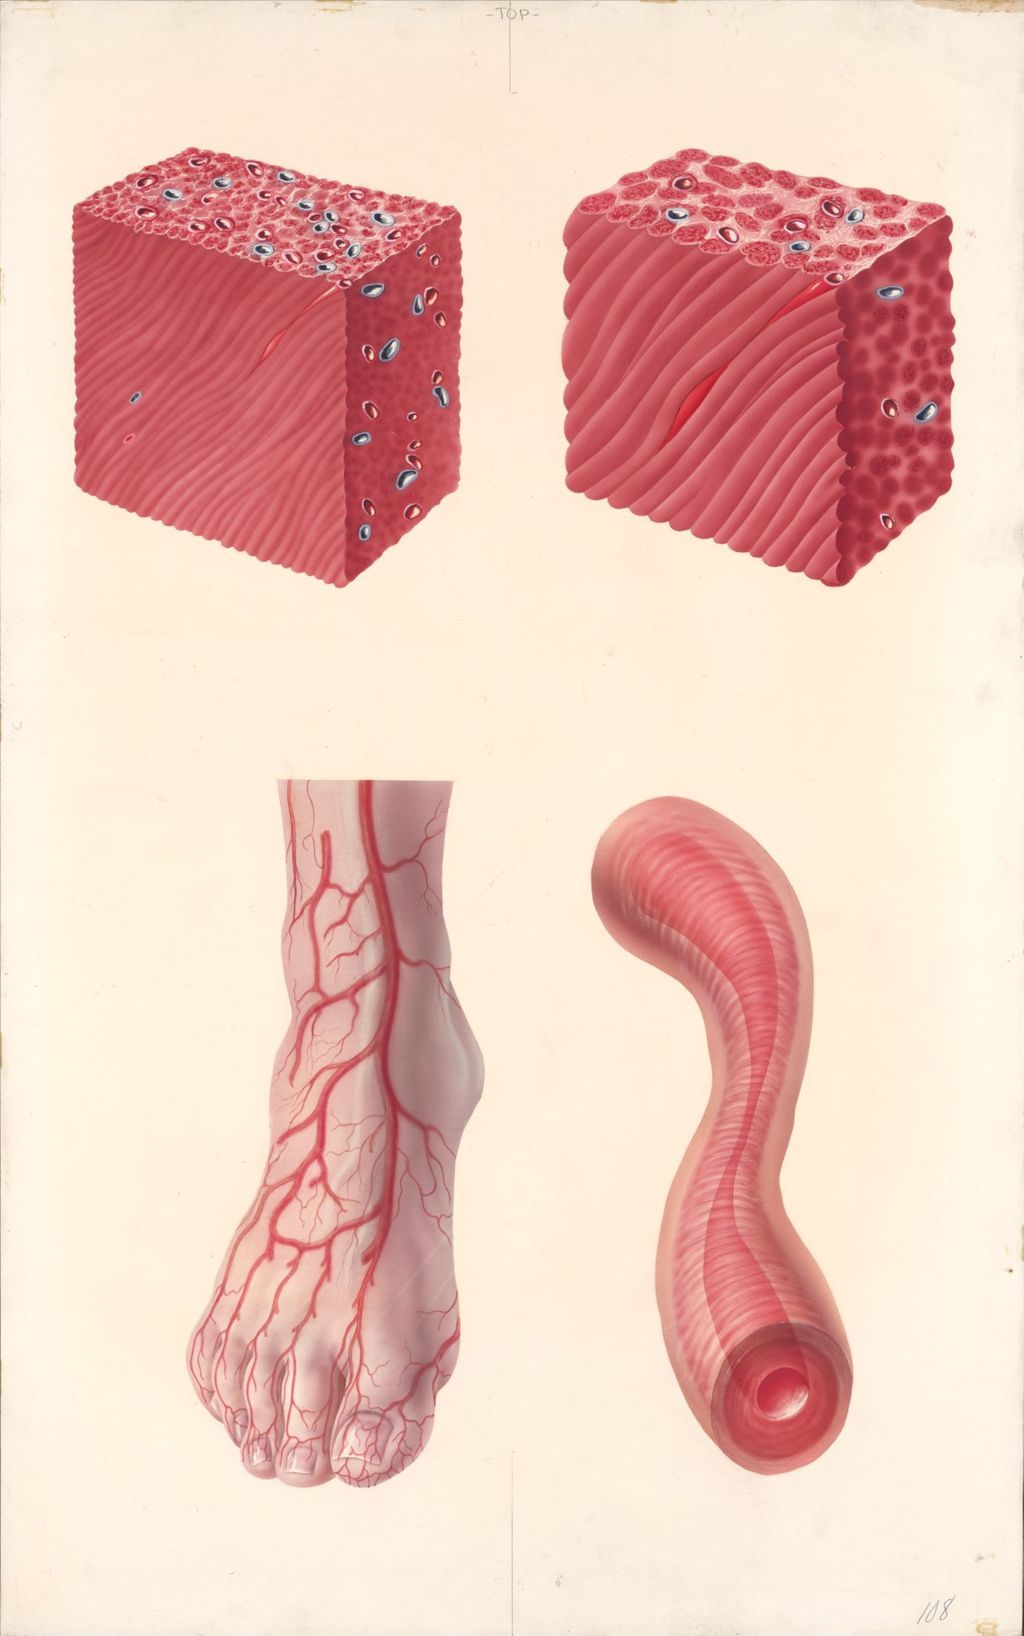 Miniature of Medical Profiles, Diupres and Hydropres, Hypertensive Heart Disease, Plate II